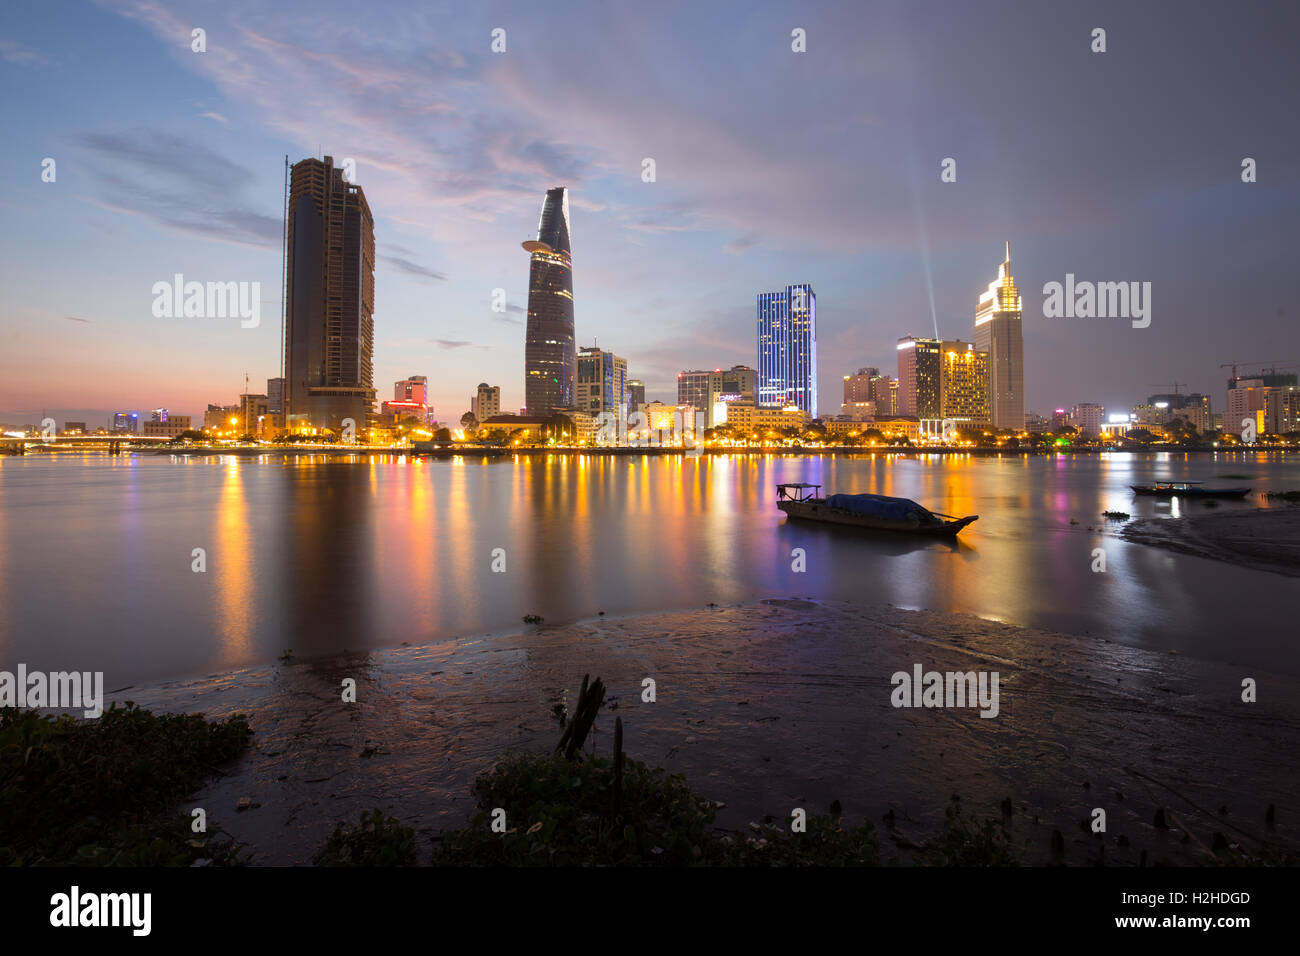 Sunset riverside along beautiful sparkling skyscrapers coal brighter show development in Ho Chi Minh city Stock Photo